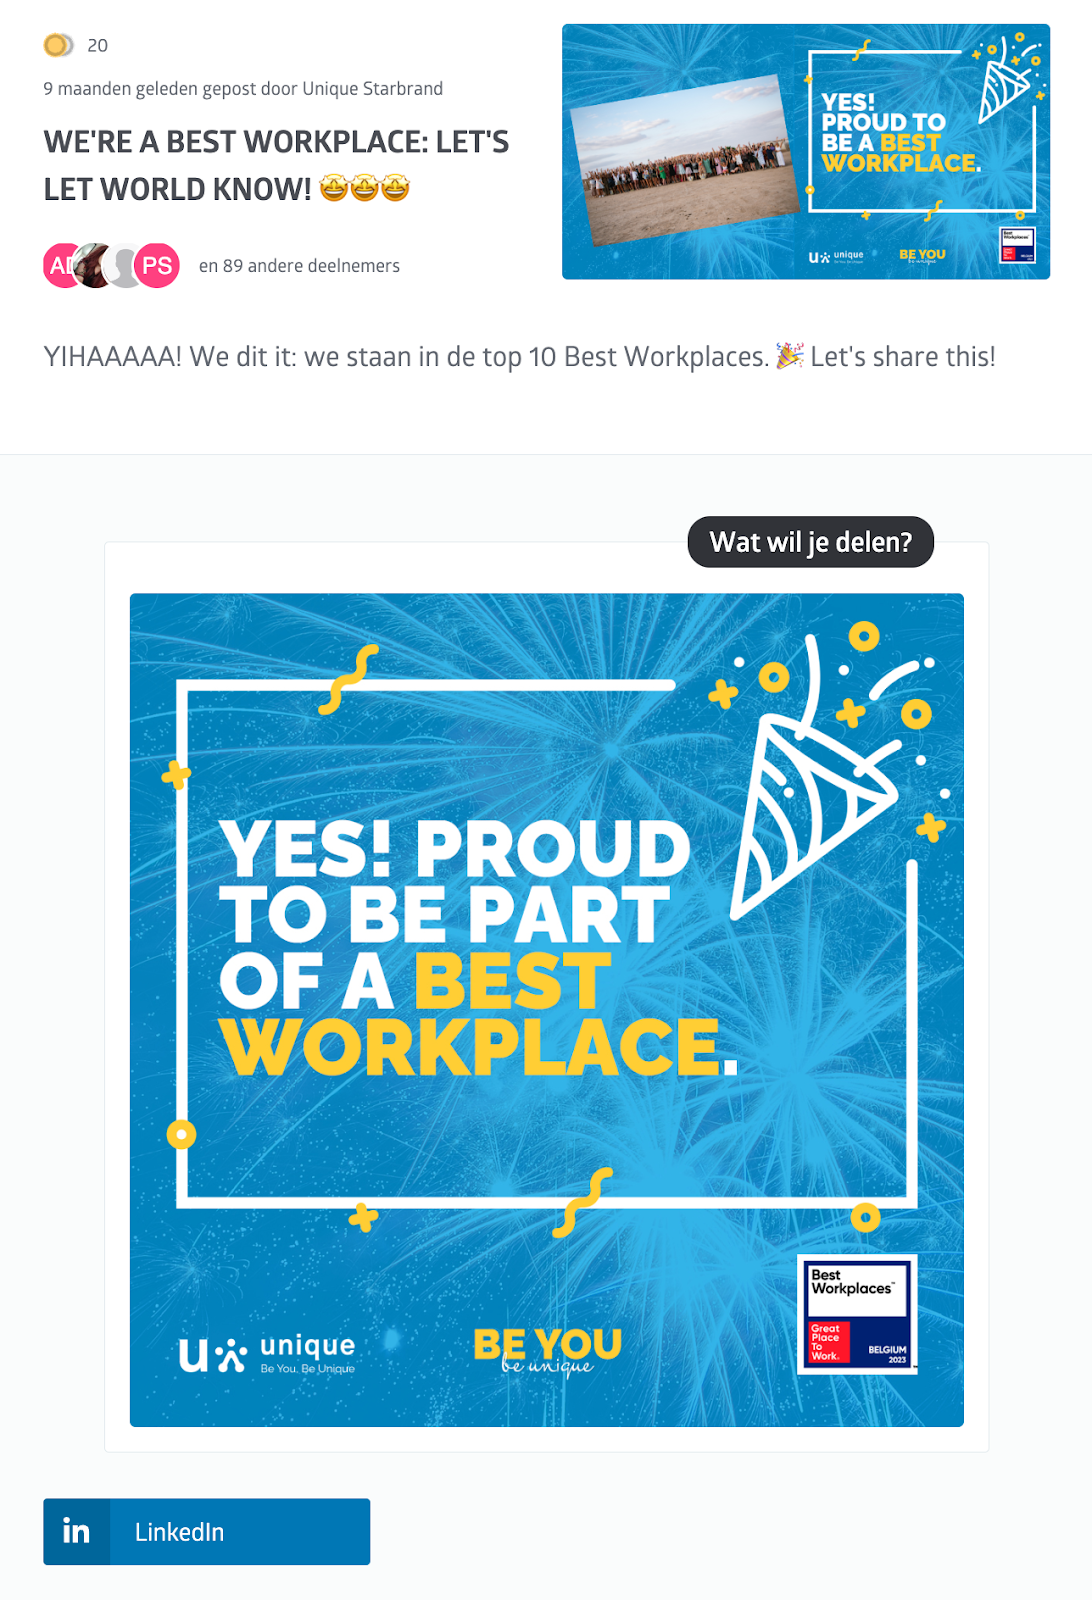 Unique celebrated them being a best place to work